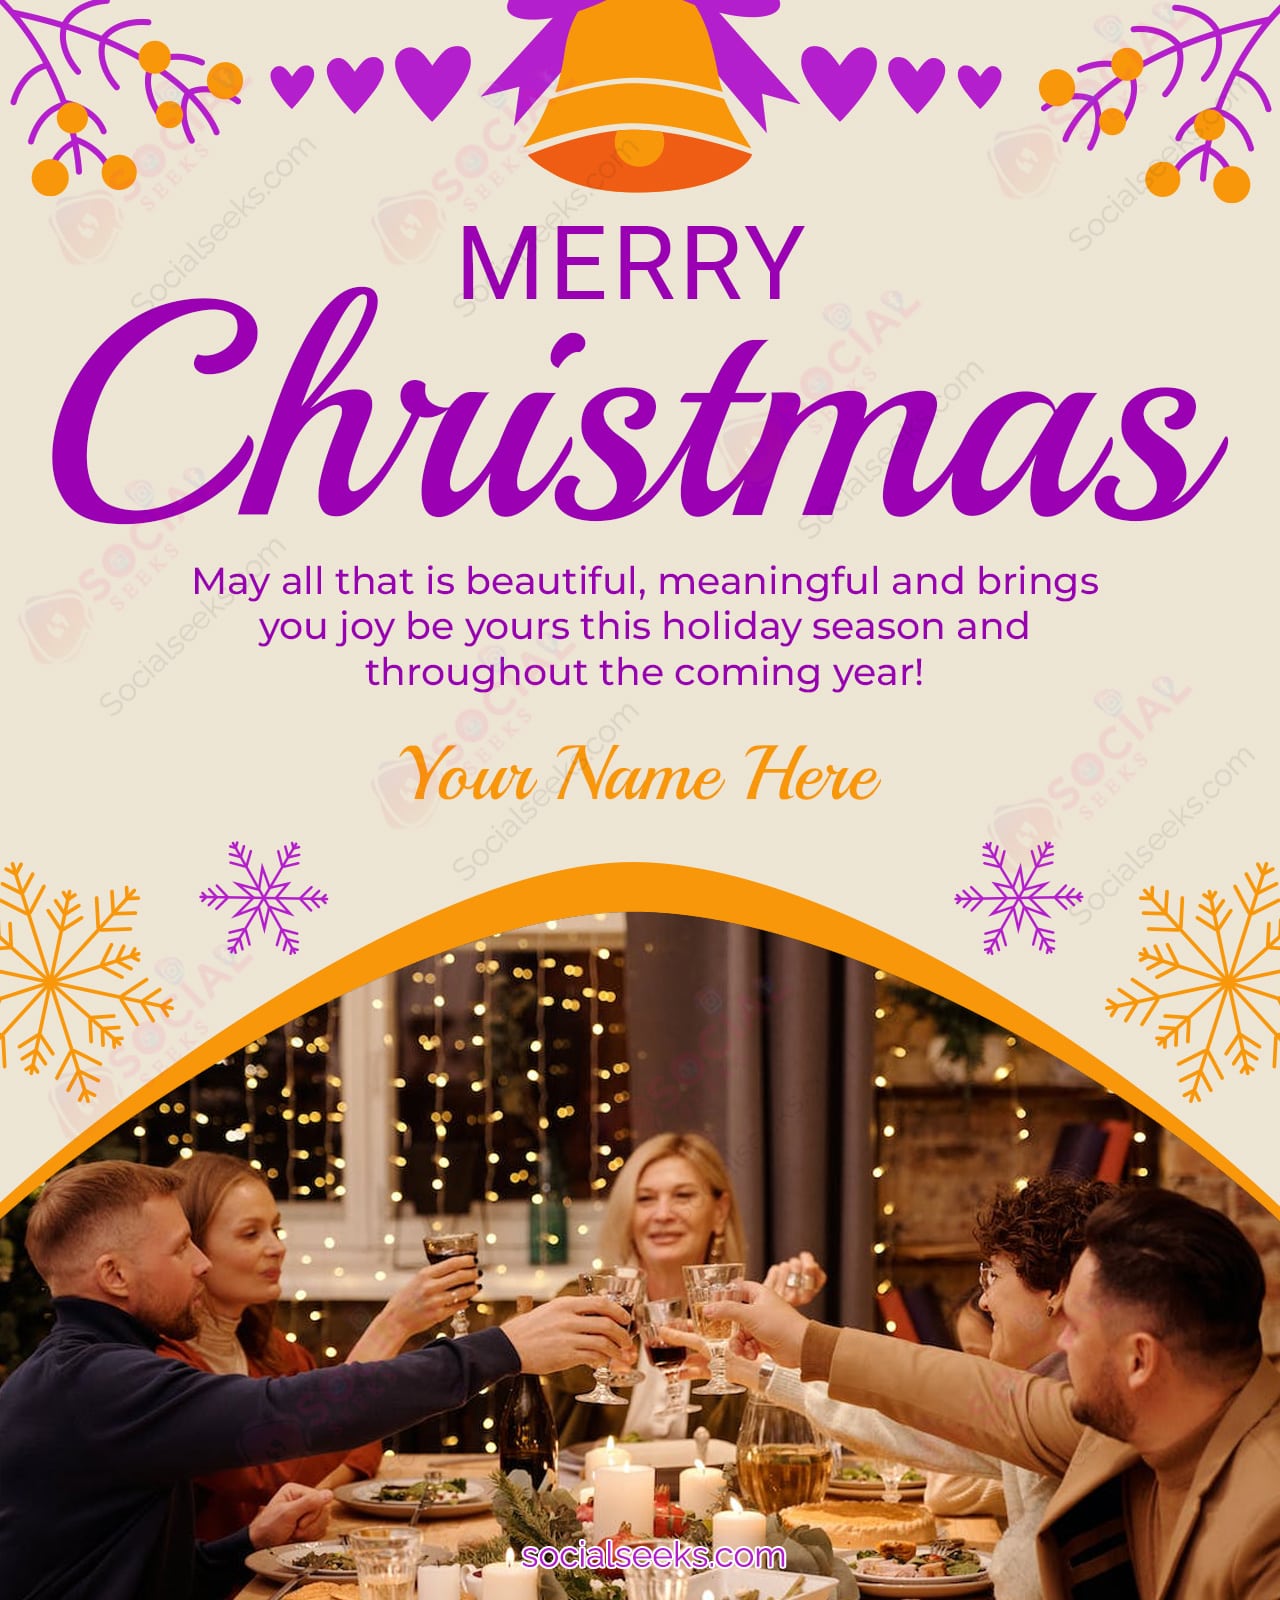 Make Christmas Cards with Photos for Free